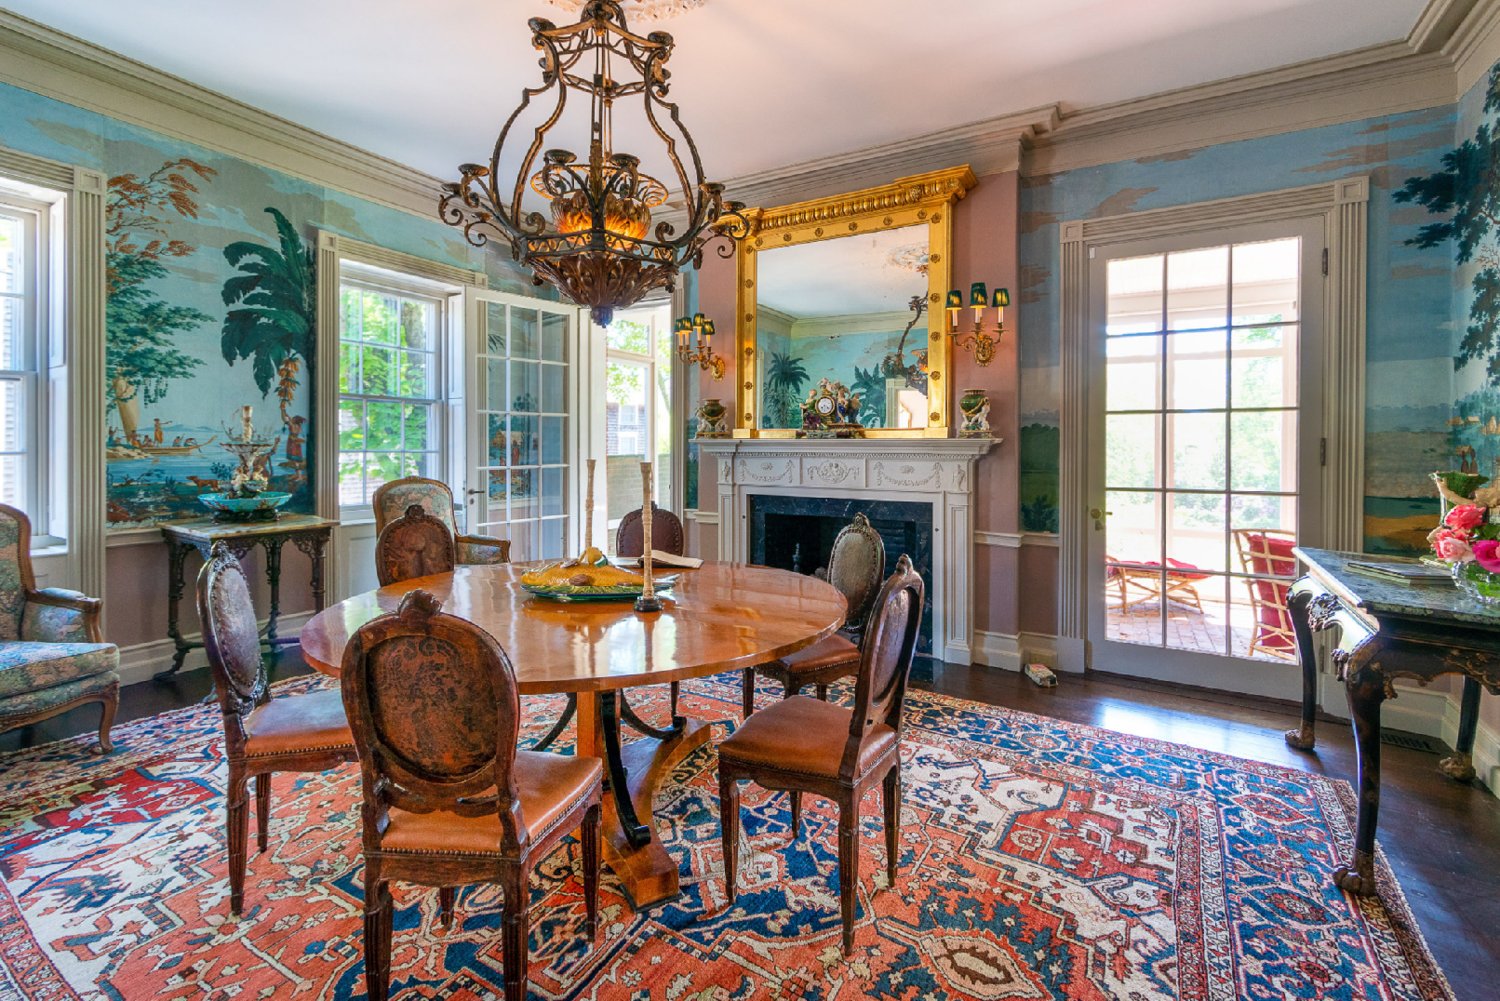 The formal dining room has a wood-burning fireplace and hand-painted French wallpaper illustrating Capt. James Cook’s South Seas sailing voyages.